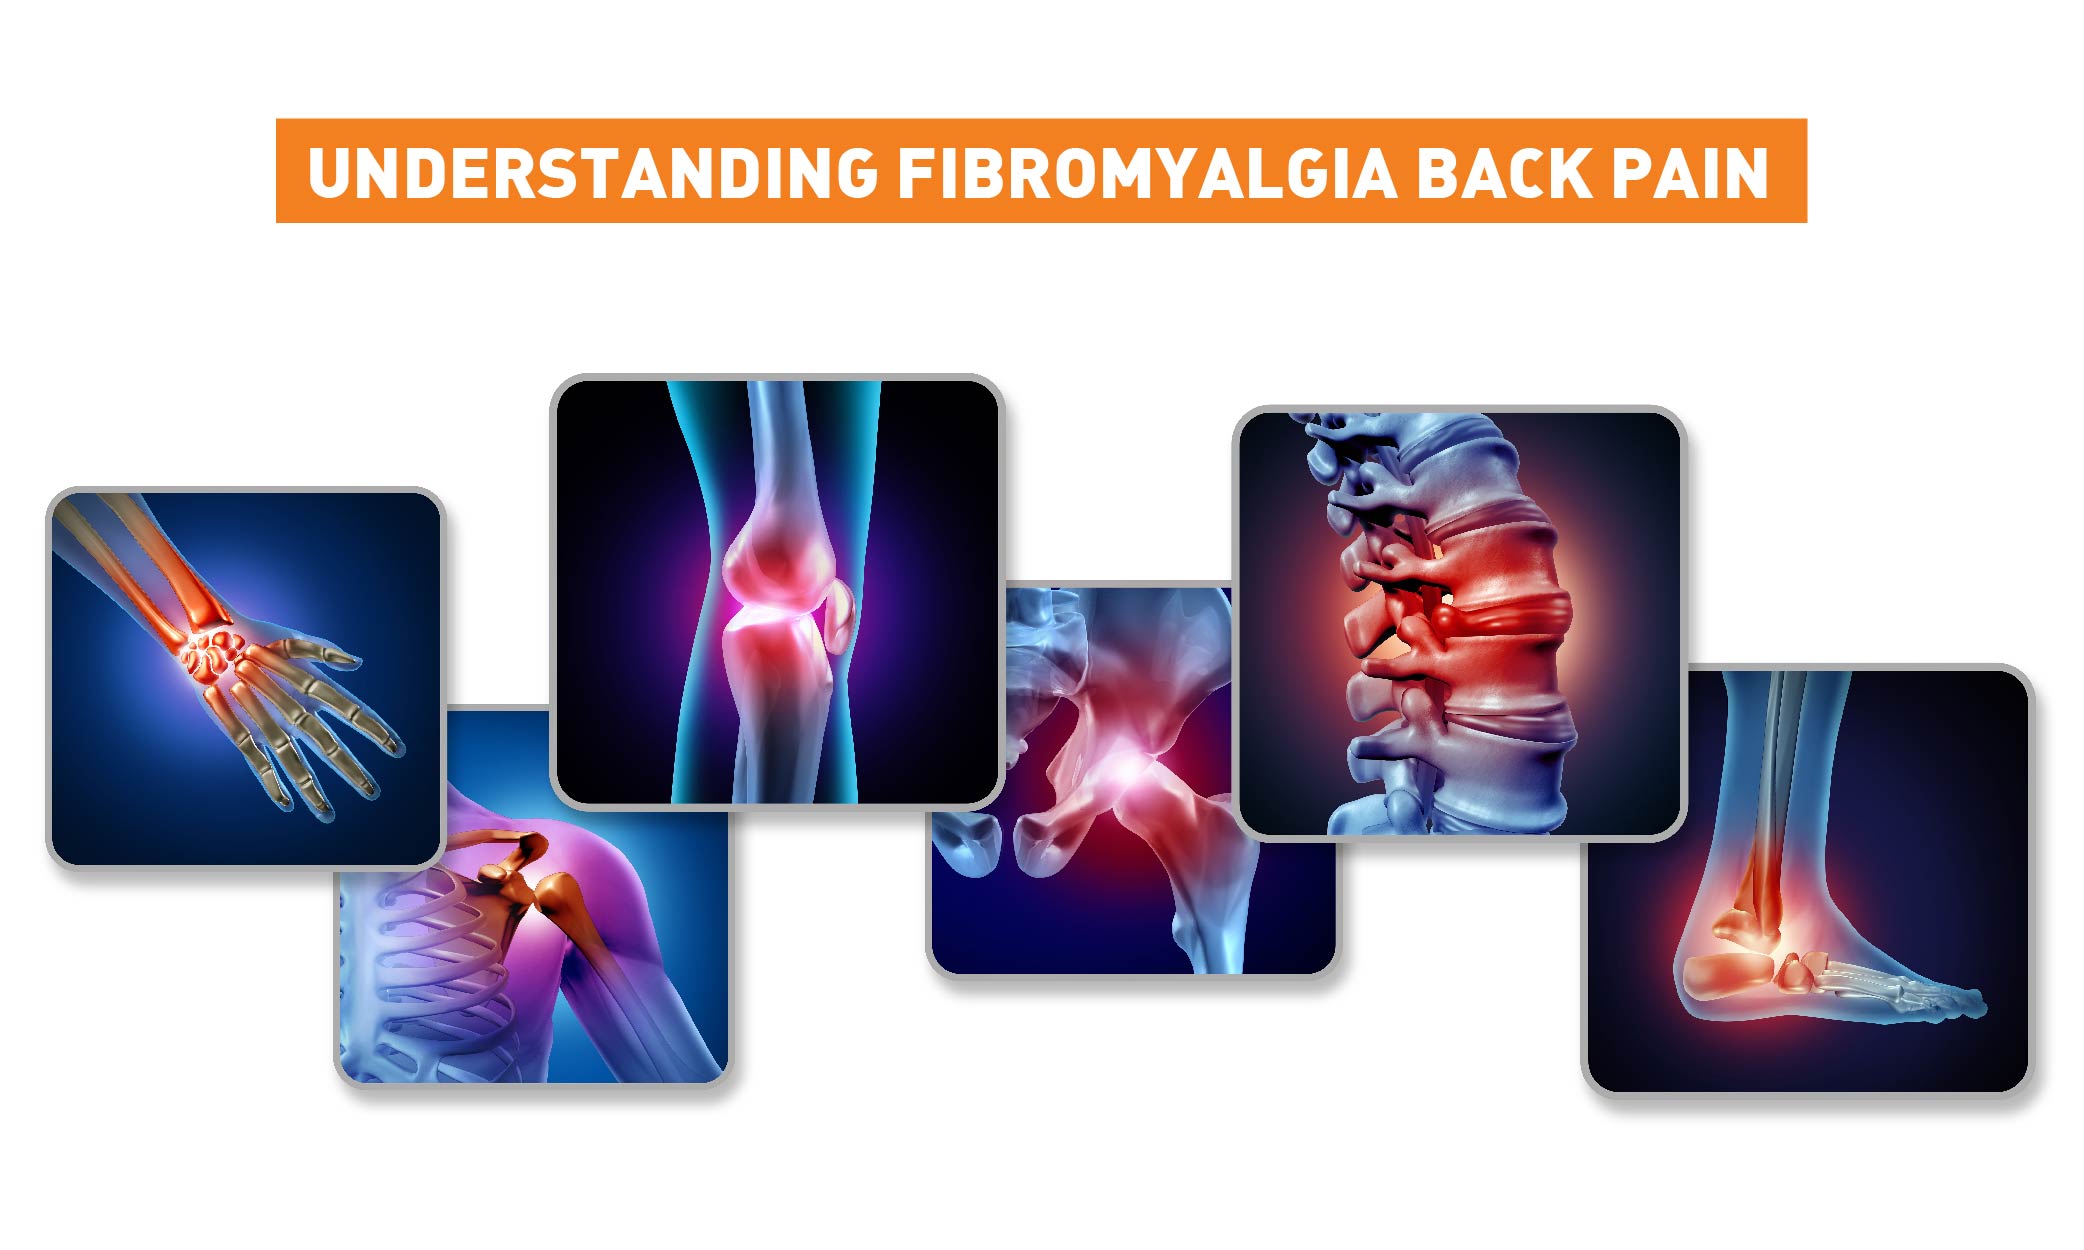 All that you want to know about treating Fibromyalgia